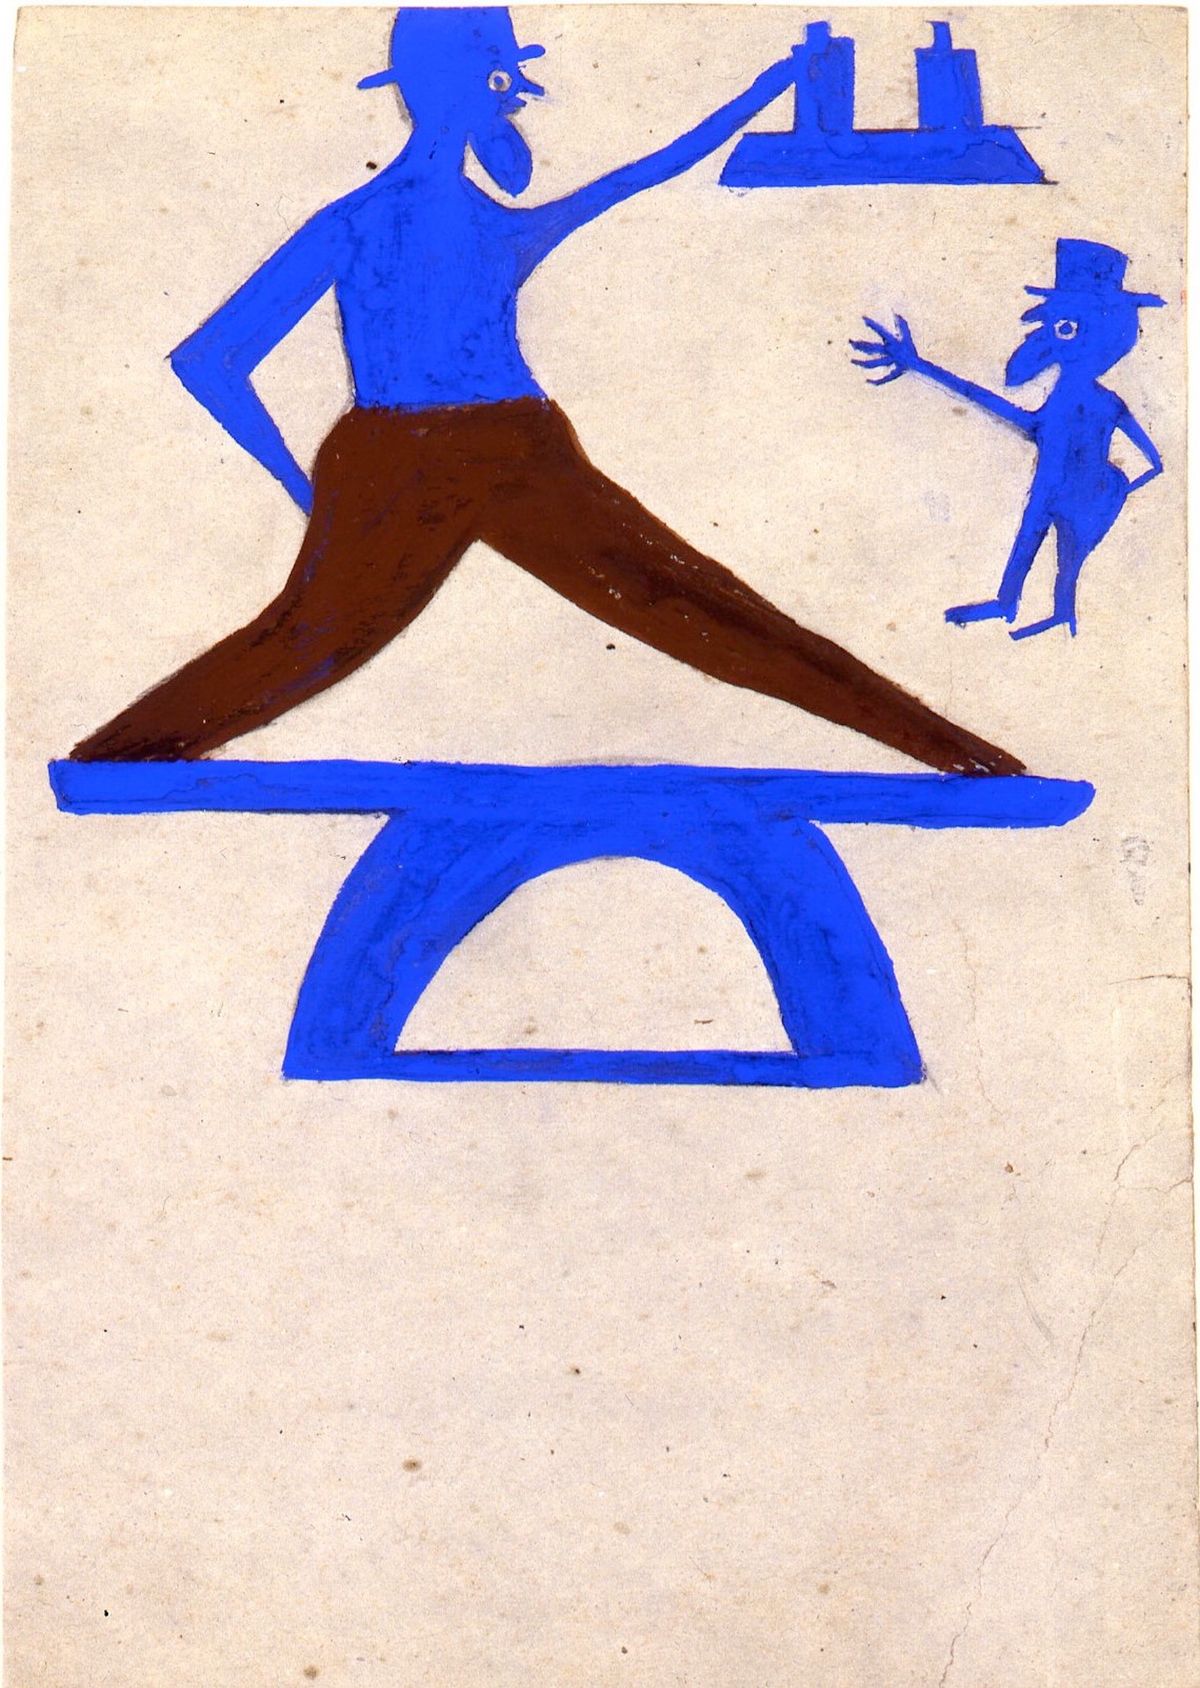 Bill Traylor, Untitled (Blue Construction, Figures, and Bottles; or Two Men Reaching for Bottles), 1939-42. Gift from the Estate of Lanford Wilson. Collection of the American Folk Art Museum. Photo courtesy of Ricco/Maresca Gallery.